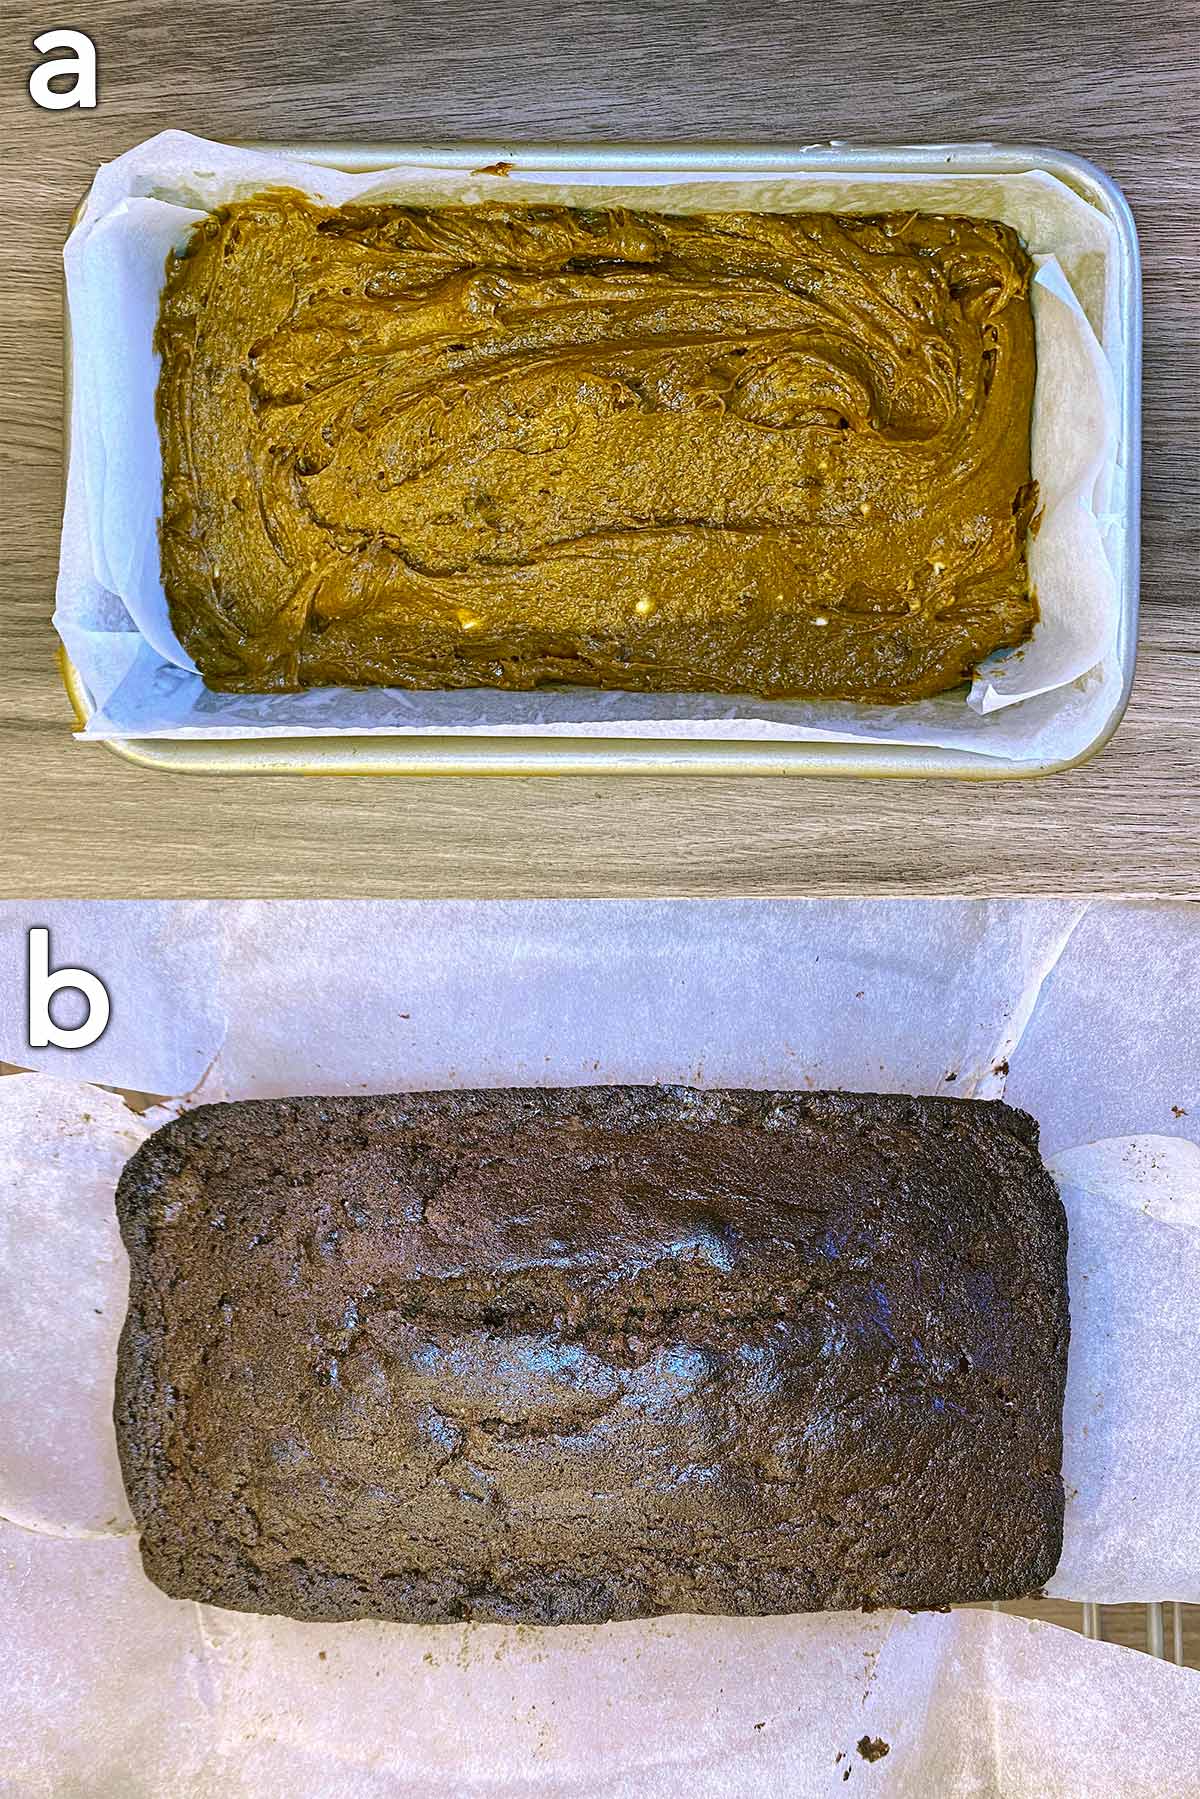 Cake batter in a loaf tin, then a cooked chocolate cake.